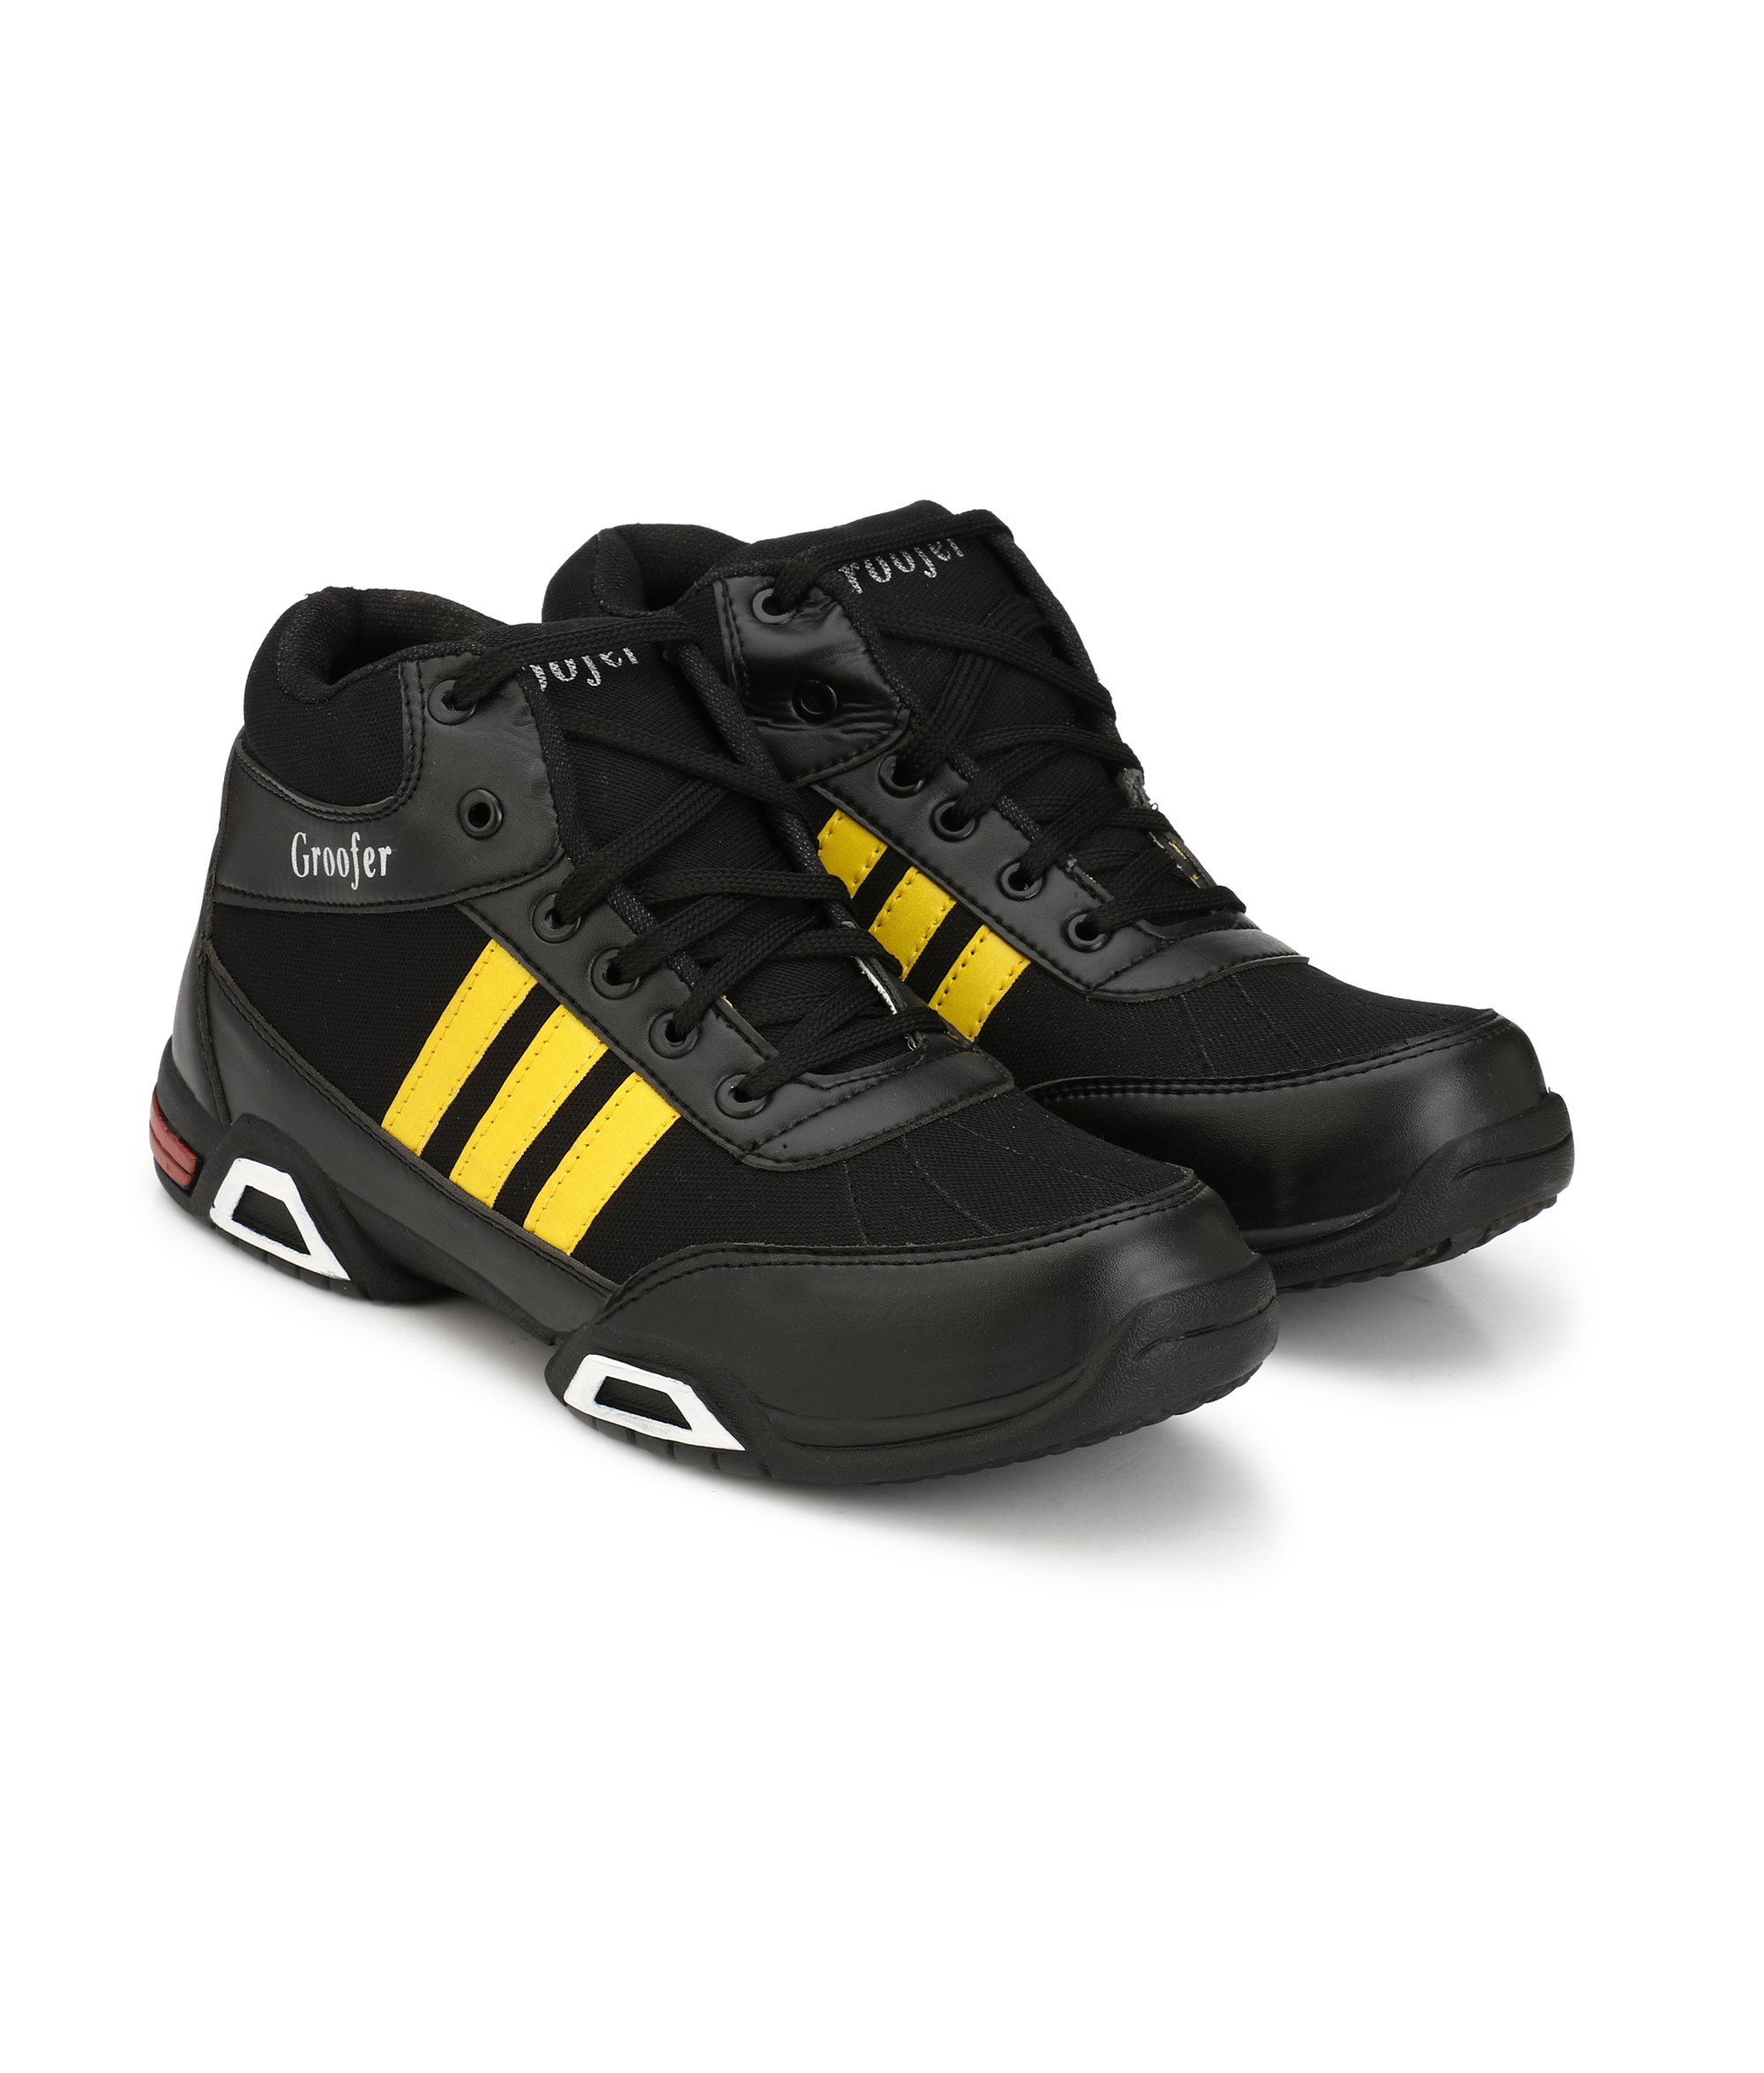 Buy Groofer Men's Black Yellow High Top Casual Shoes Online @ ₹549 from ...